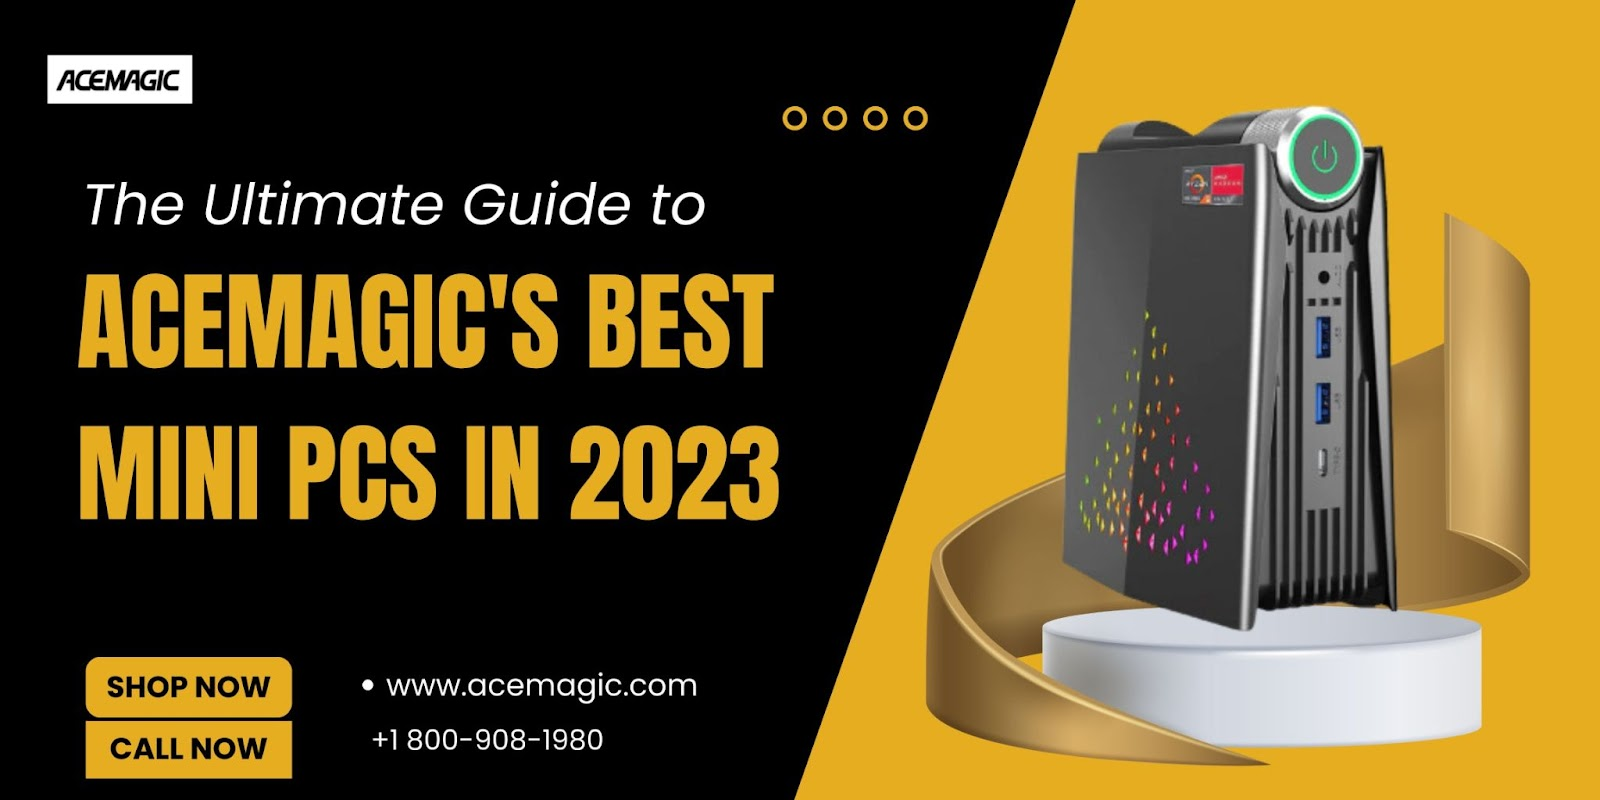 The Ultimate Guide to Acemagic's Best Mini PCs in 2023